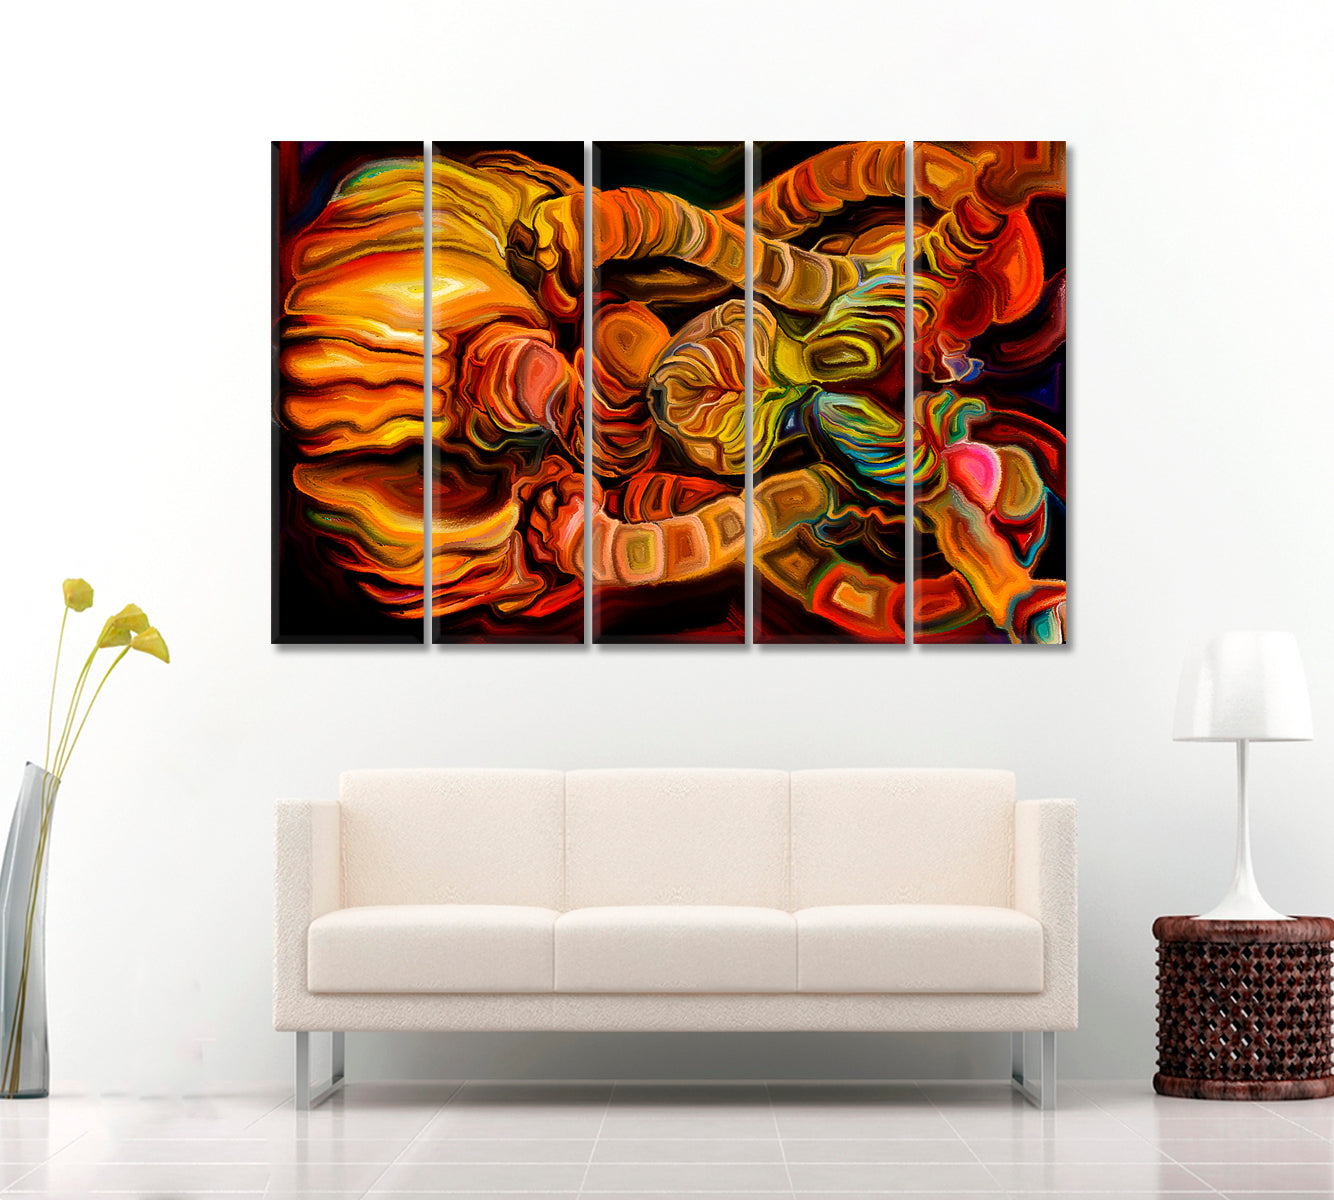 LIFE INSIDE Abstract Forms Contemporary Art Artesty 5 panels 36" x 24" 